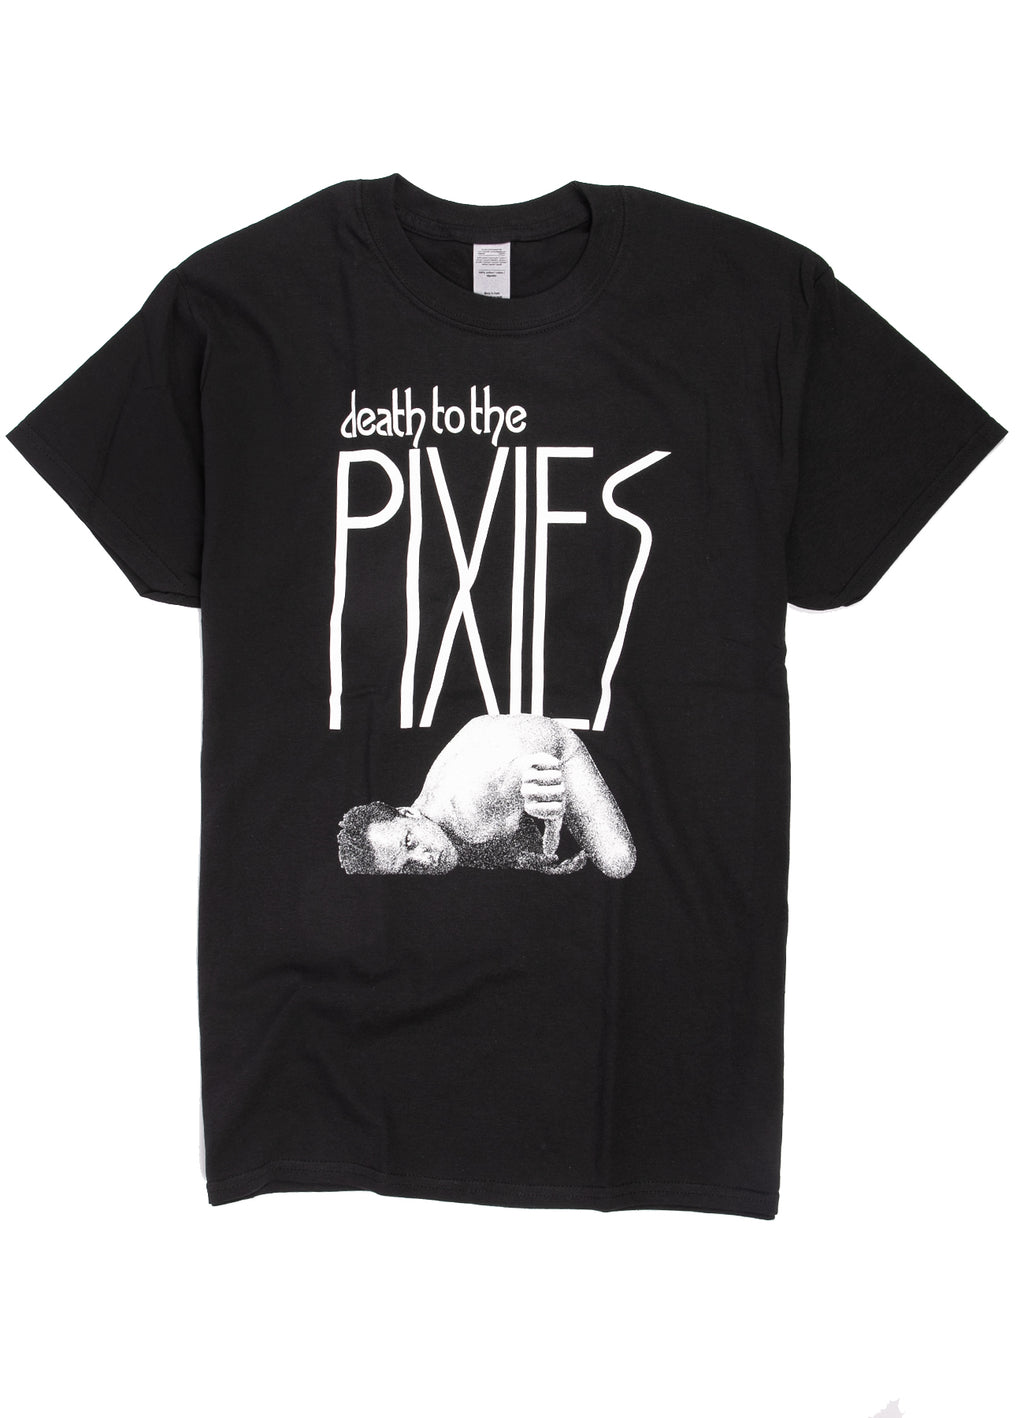 Pixies "Death to the Pixies" t-shirt.